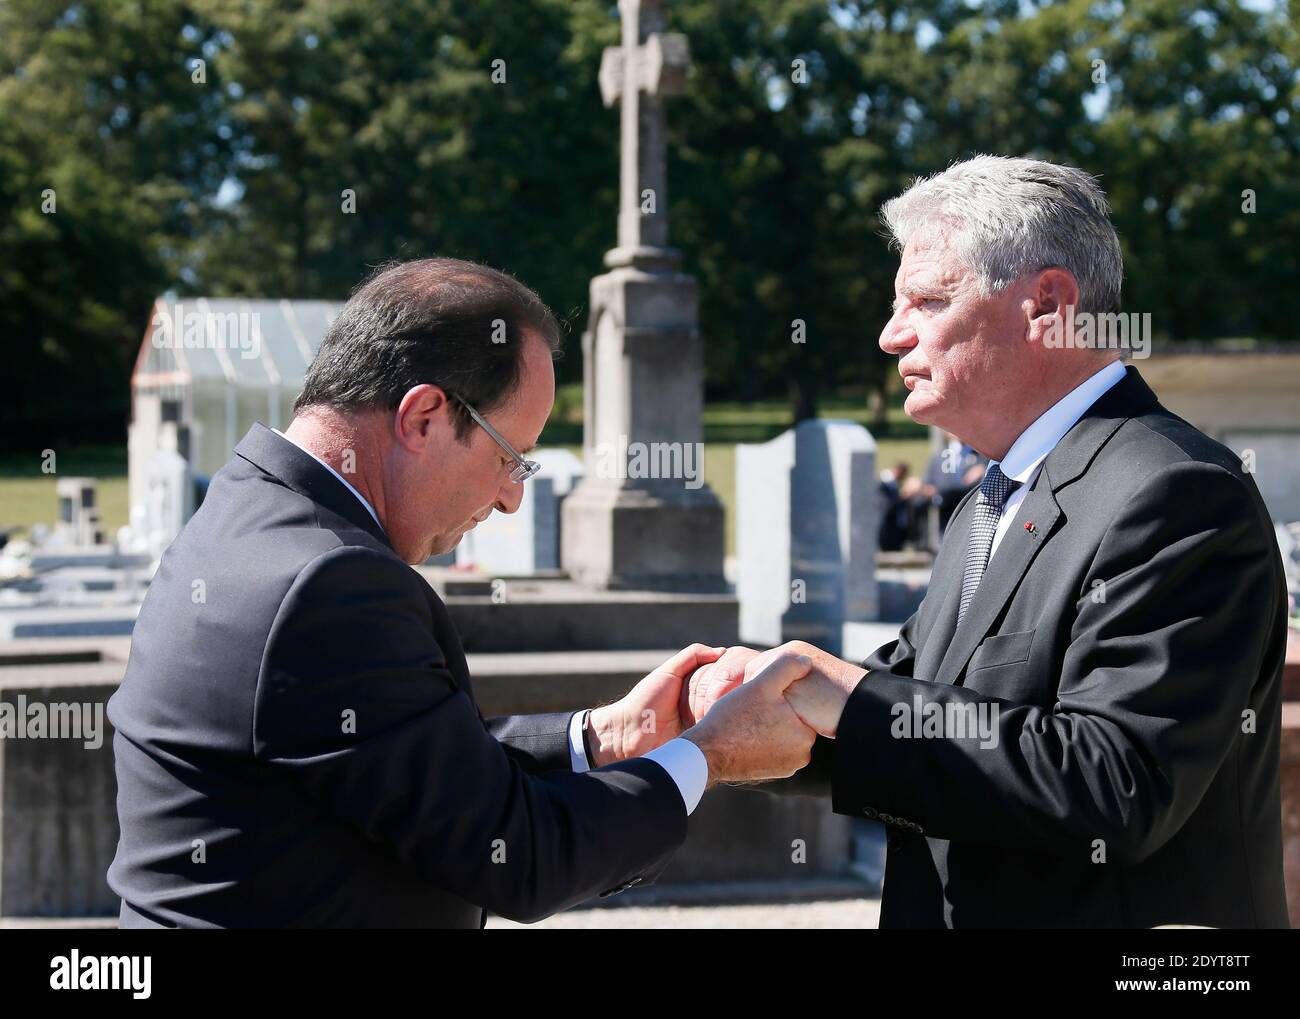 French President Francois Hollande (L) and German President Joachim Gauck are pictured at the memorial site in Oradour-sur-Glane, France on September 4, 2013. A unit of SS officers murdered 642 citizens of the town during World War II in June 1944. The German President is on a three-day visit to France. Photo by Patrick Bernard/ABACAPRESS.COM Stock Photo